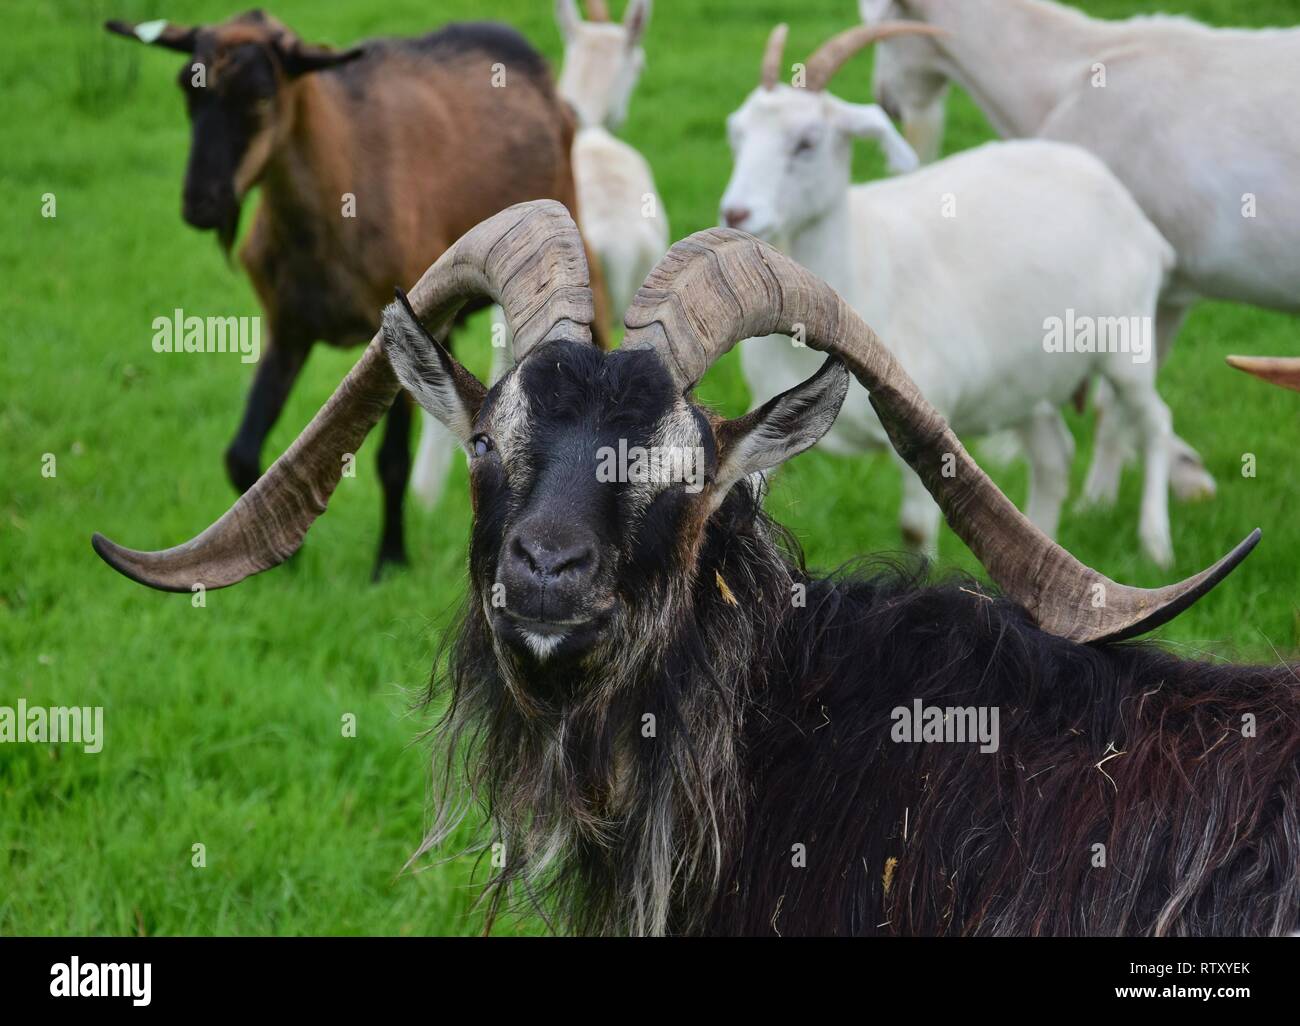 Portrait of an impressive male goat, blind in one eye, with long horns and long coat. Other goats in the background. Stock Photo